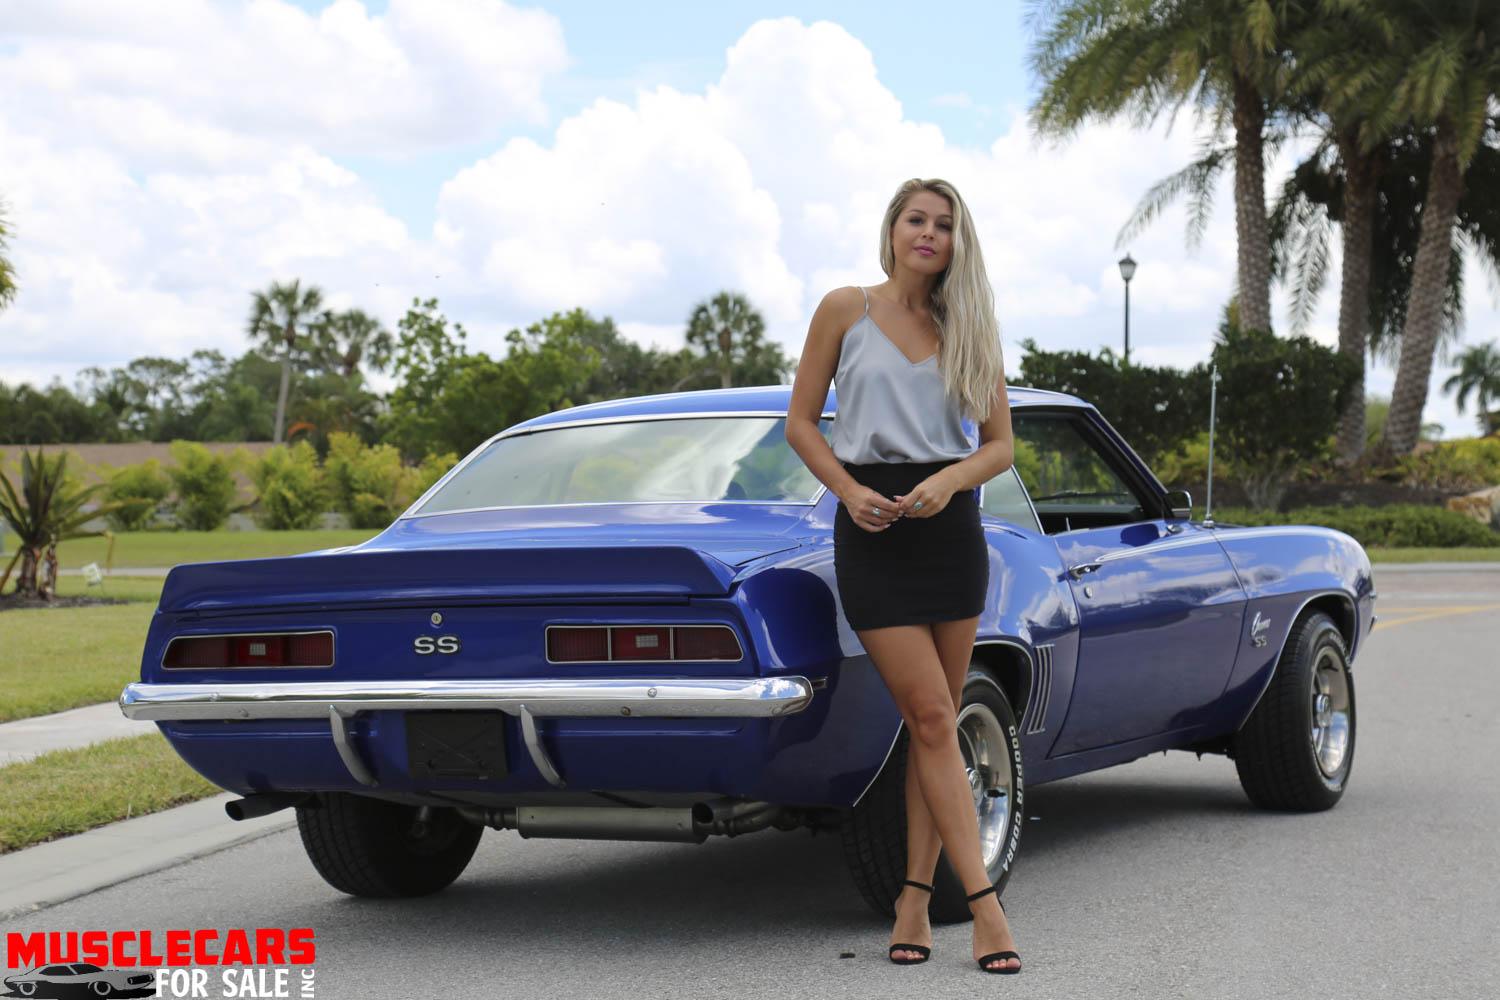 Used 1969 Chevrolet Camaro SS For Sale ($32,500) | Muscle Cars for Sale